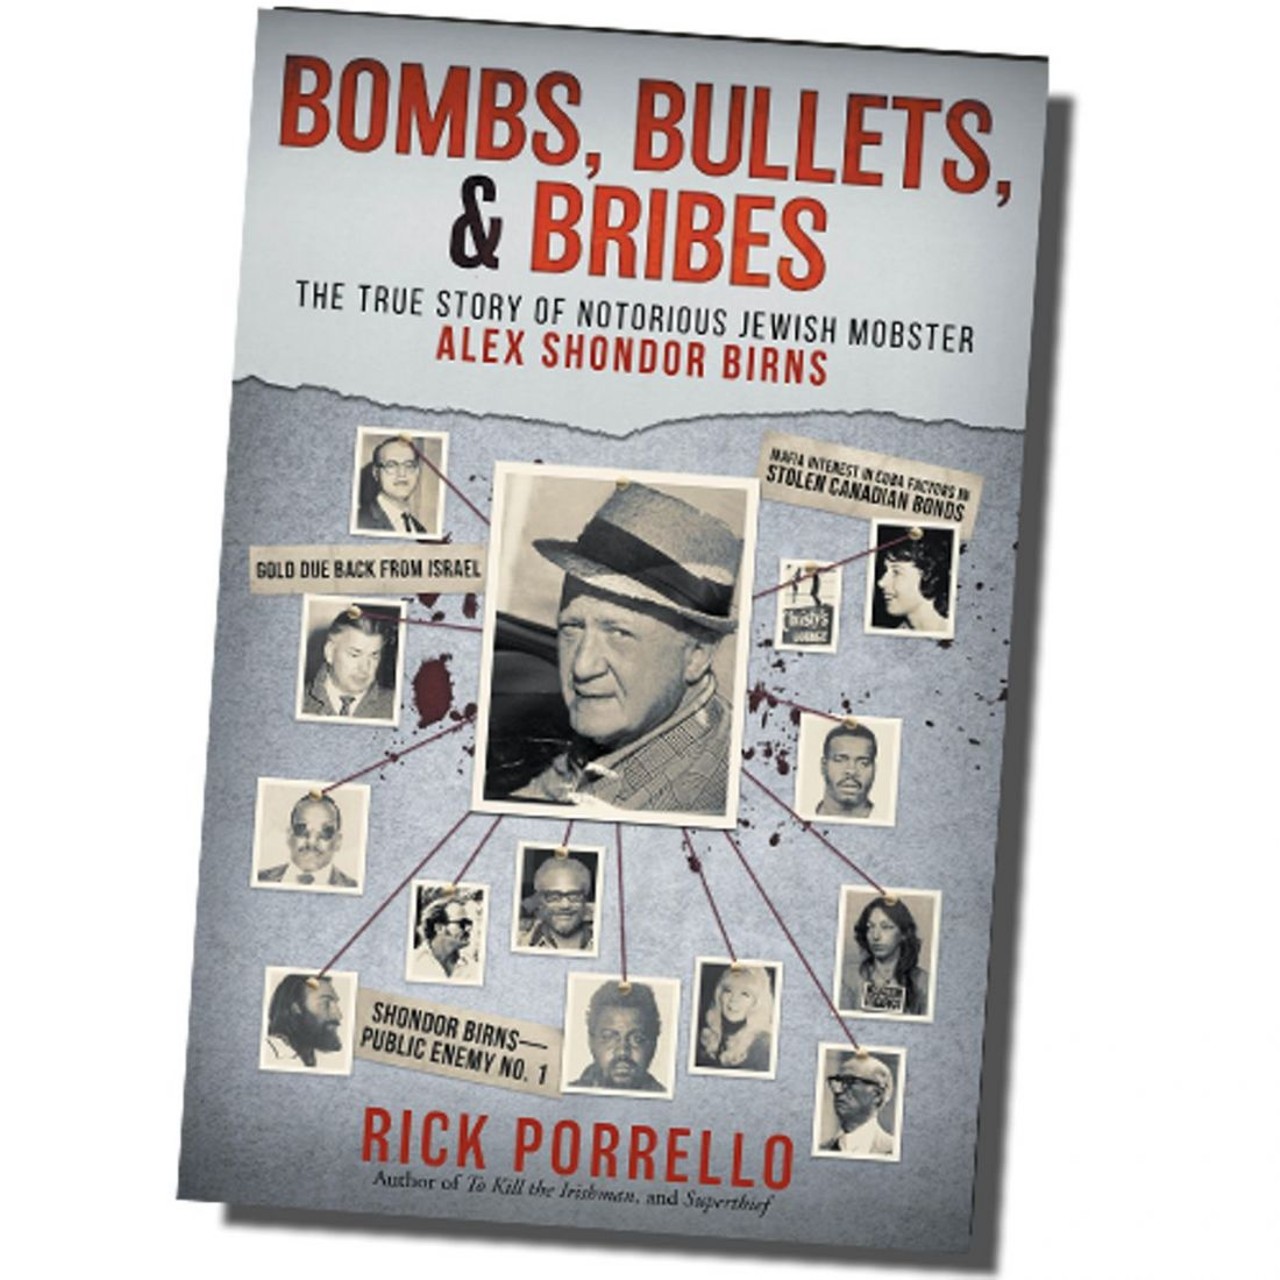 Cleveland Stories Dinner Parties with local author Rick Porello 
Wed, Feb. 5
Book Cover Artwork